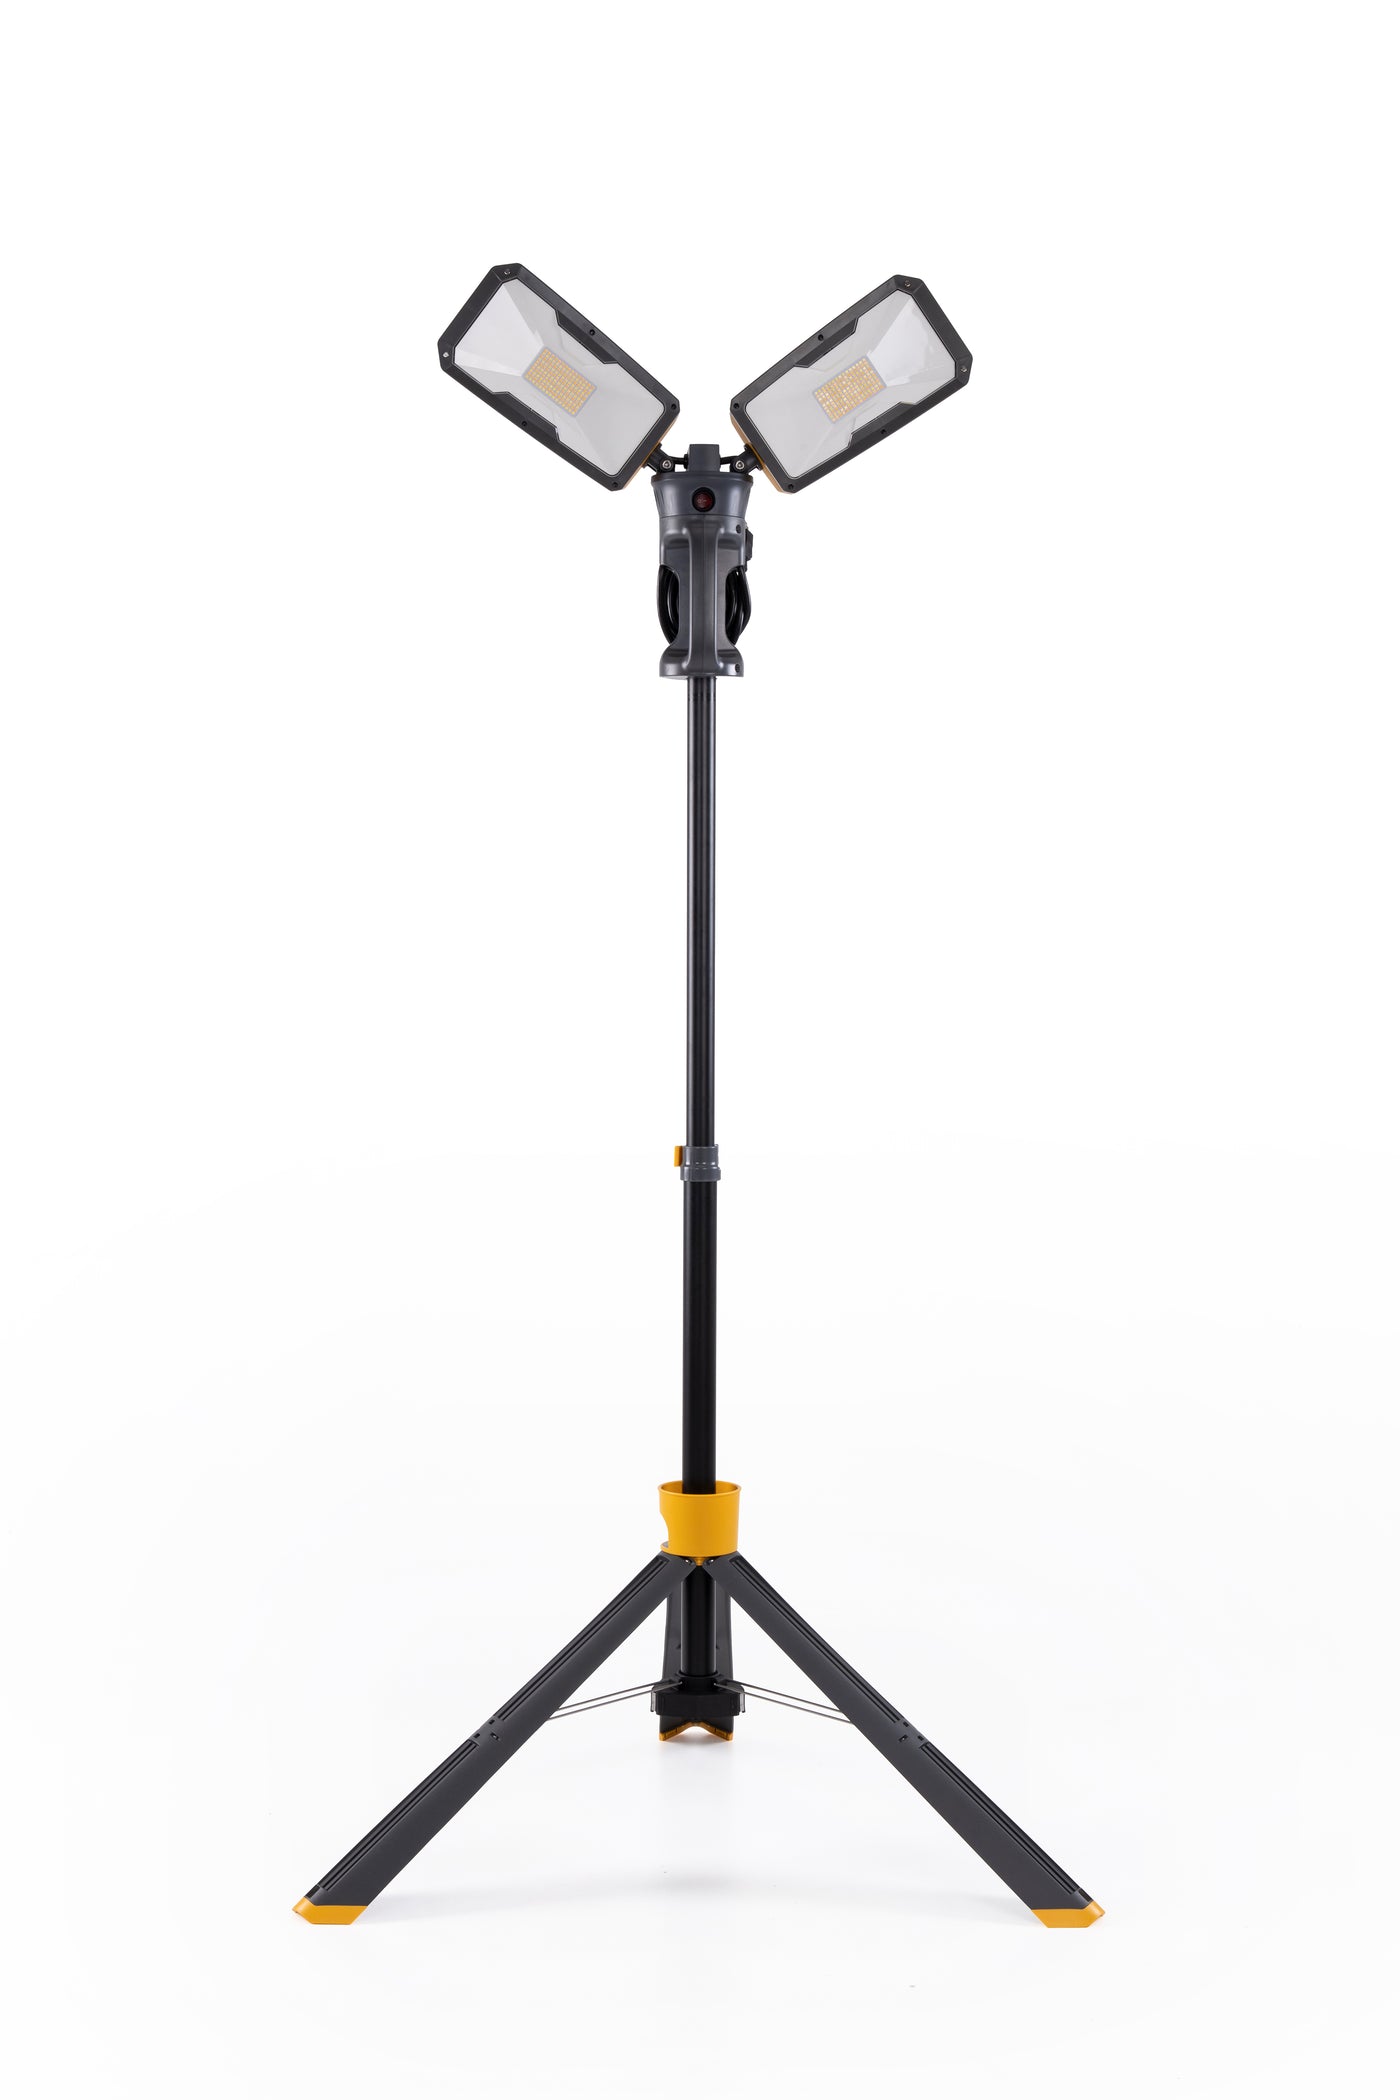 LUTEC-PERI Max 11000LM, 3000K-5000K, 93W, Portable LED Work Light With Dual Rotating Heads, Telescopic Foldable Tripod Stand